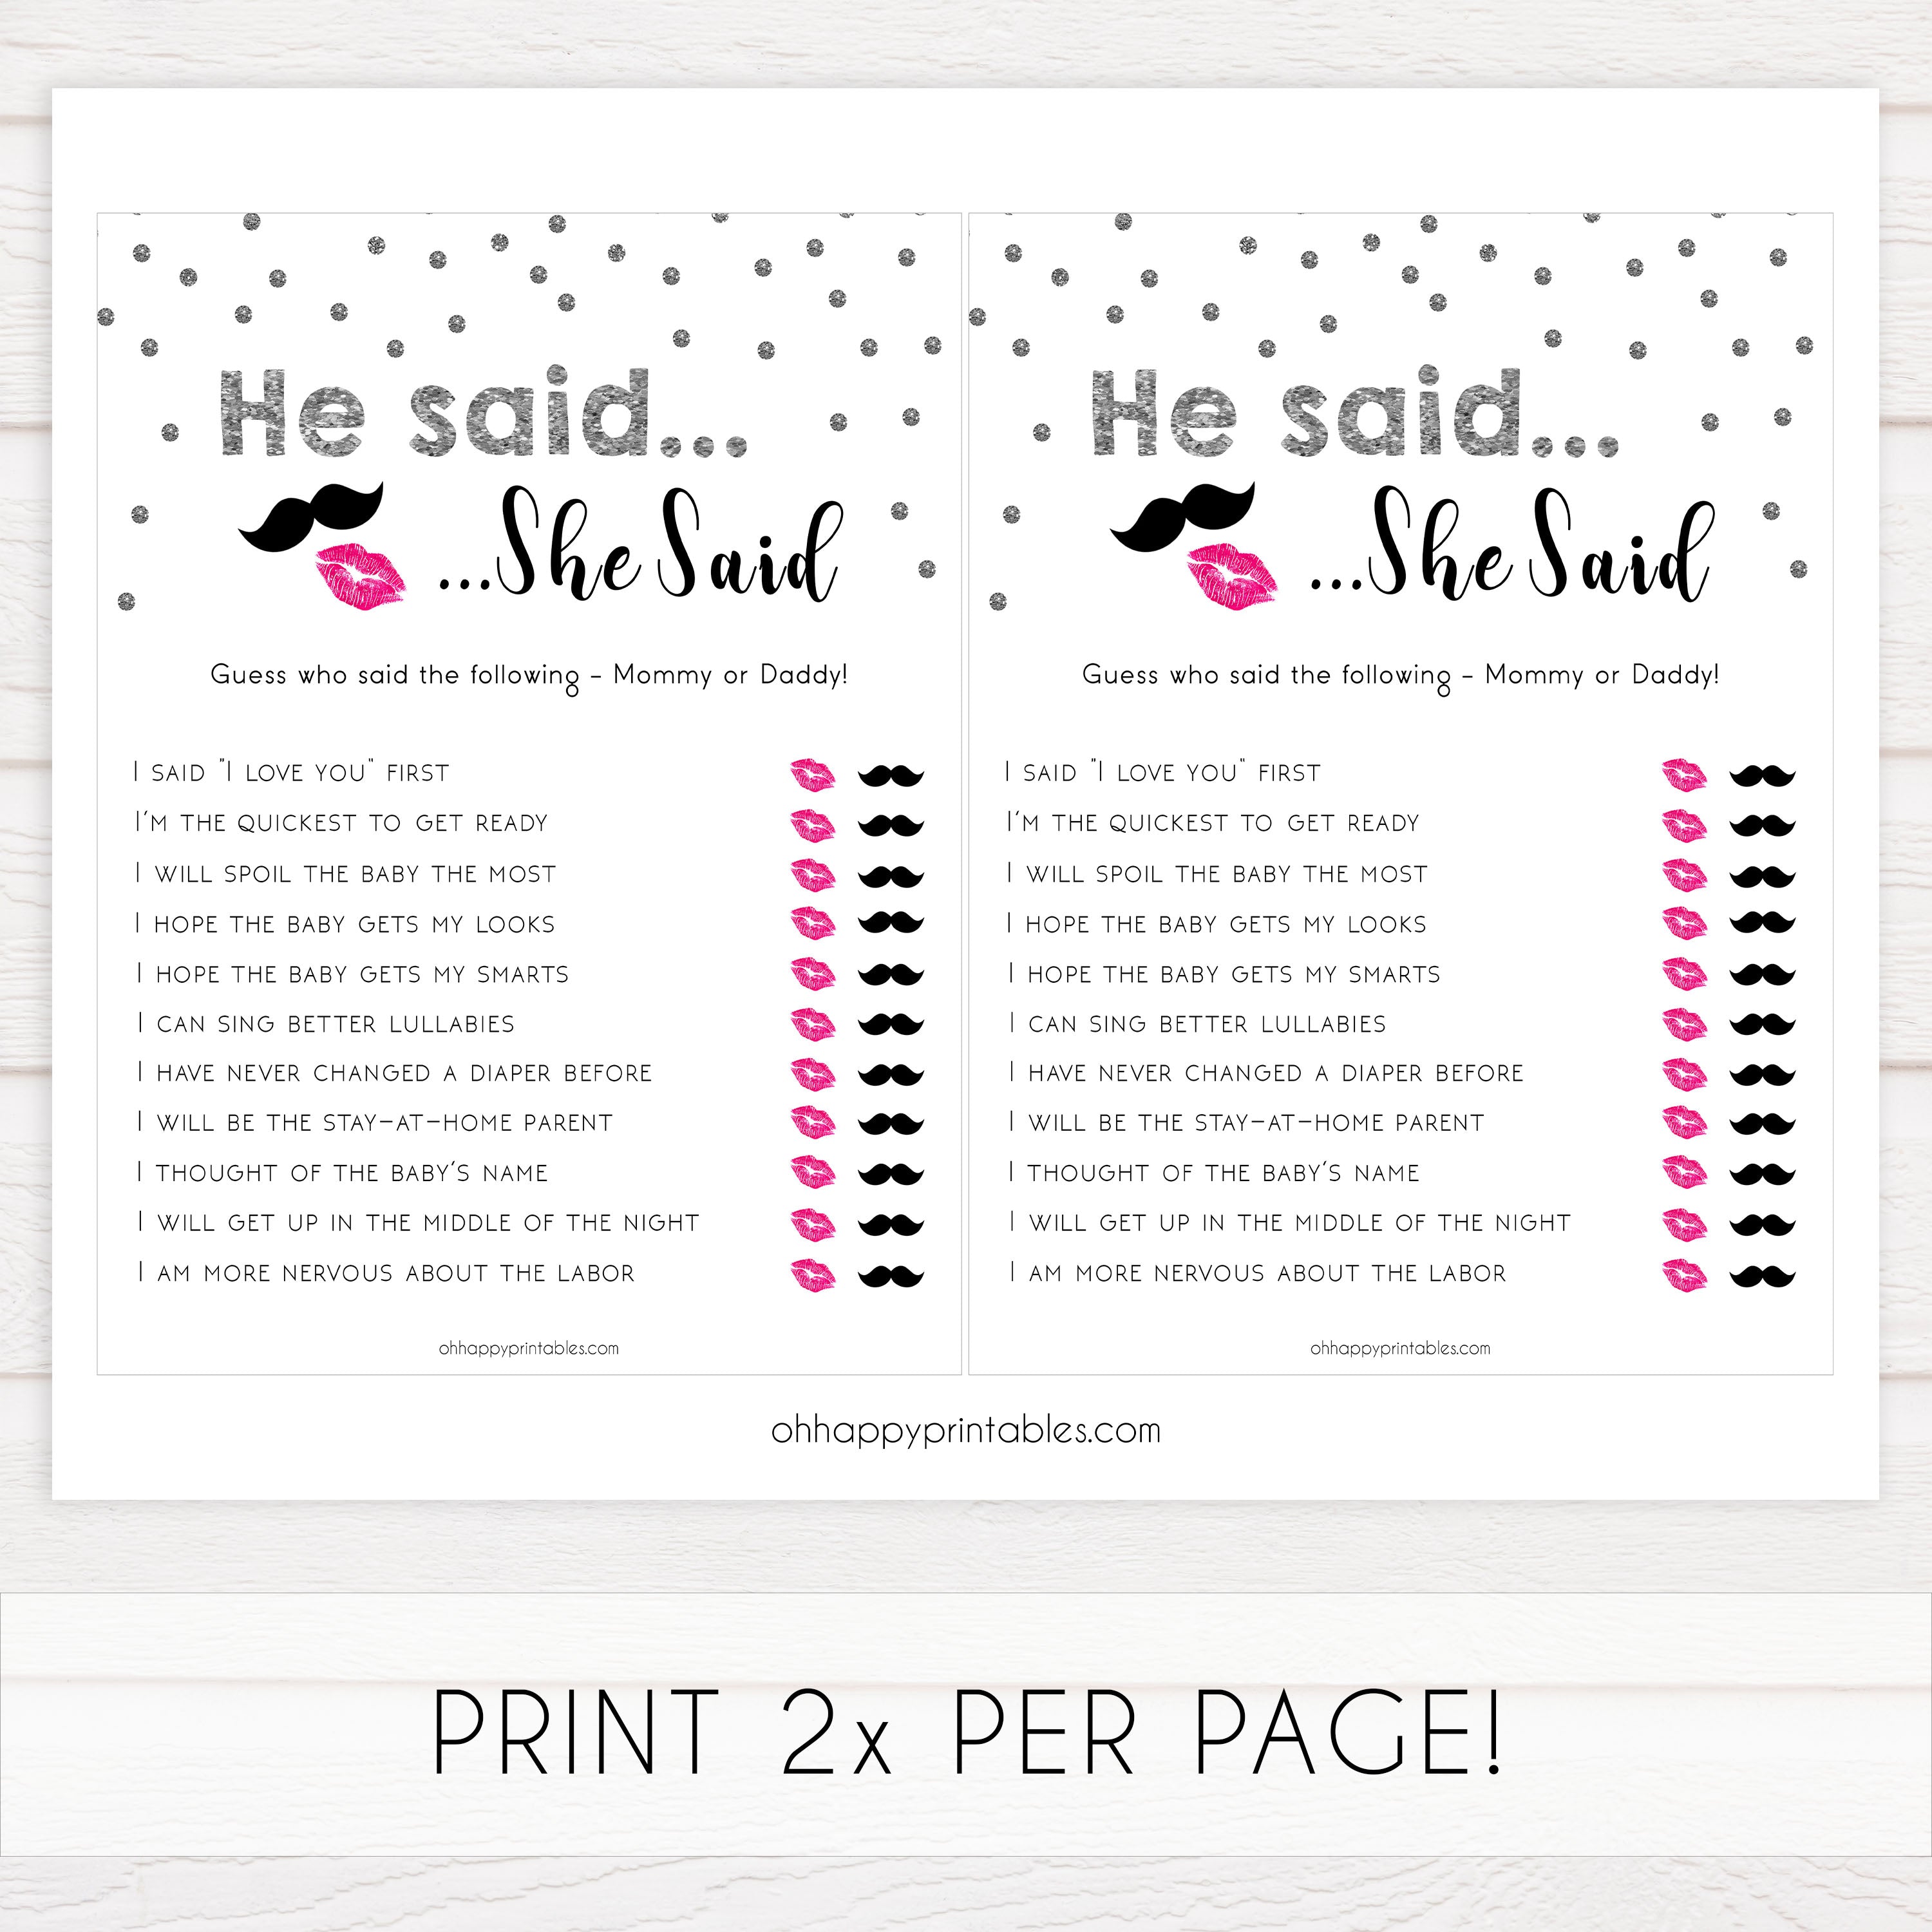 he said she said, mommy daddy guess who game, Printable baby shower games, baby silver glitter fun baby games, baby shower games, fun baby shower ideas, top baby shower ideas, silver glitter shower baby shower, friends baby shower ideas